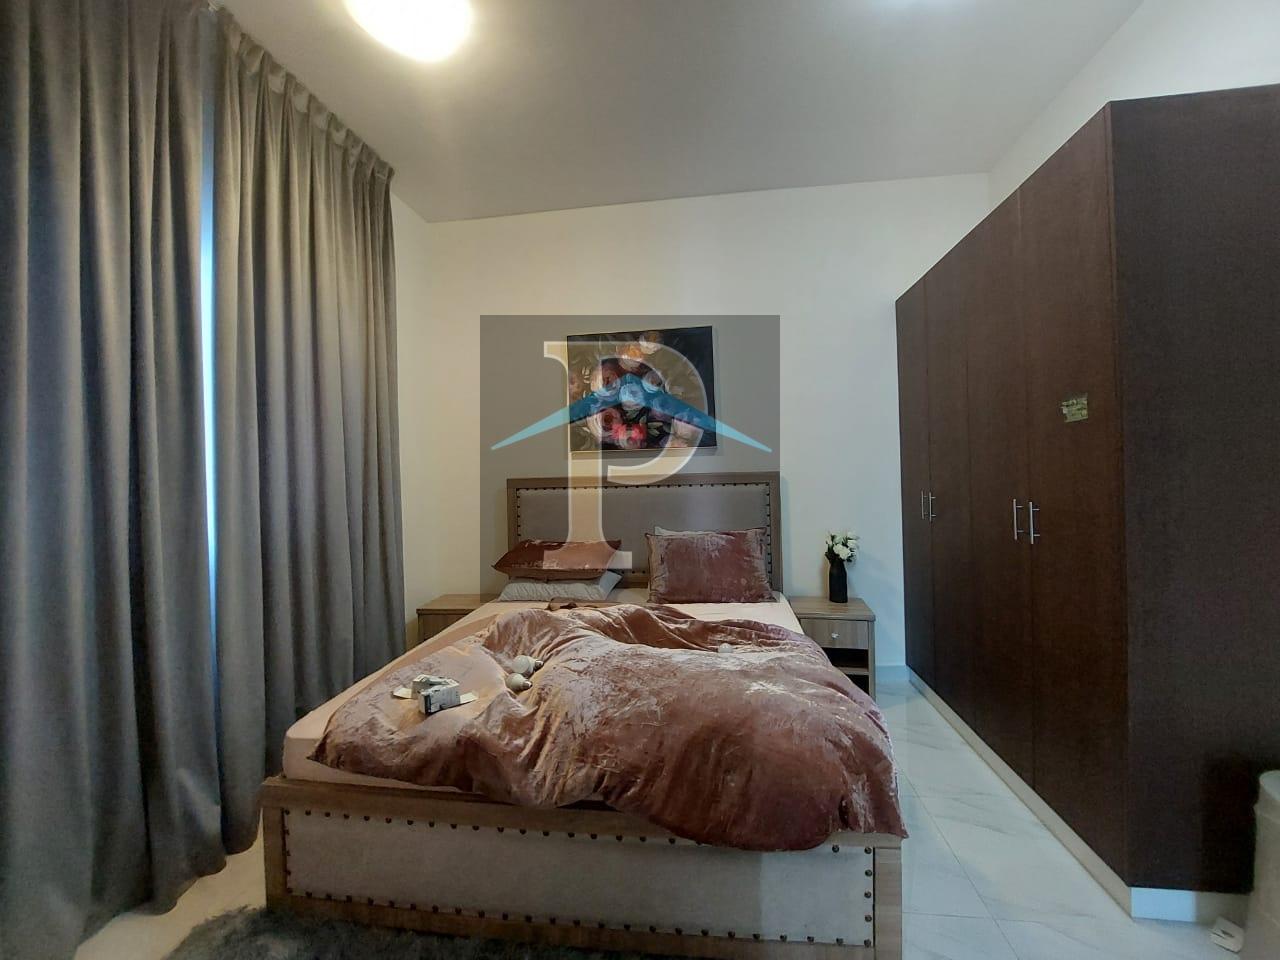 2 bed, 3 bath Apartment for rent in Sydney Tower, Jumeirah Village Circle, Dubai for price AED 125000 yearly 